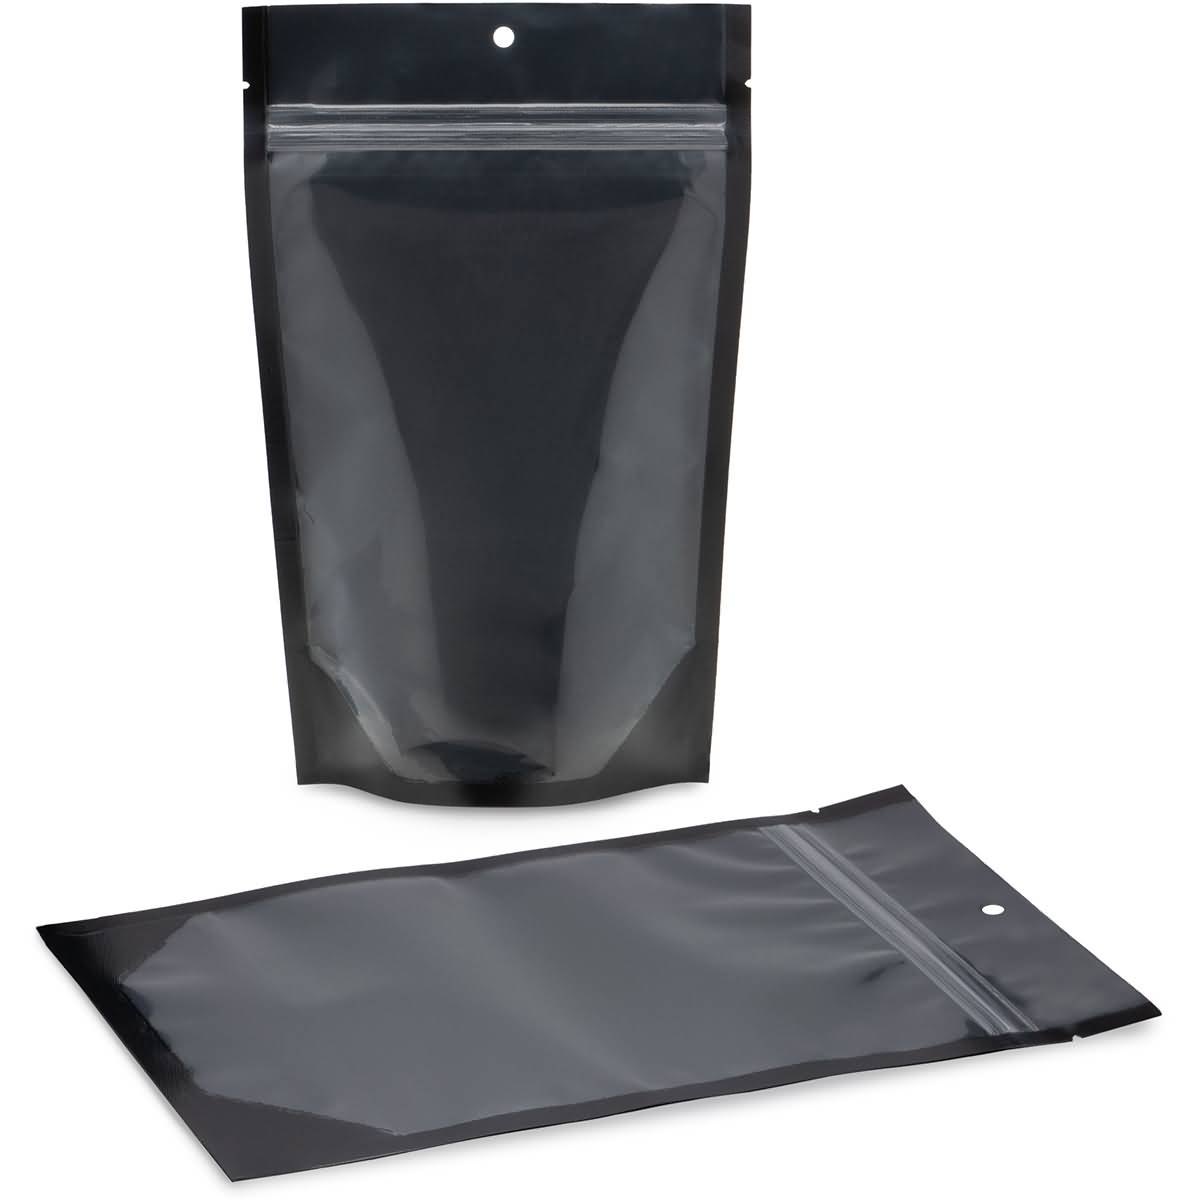 https://cdnimg.carepac.com/wp-content/uploads/2021/01/3618_ClearSilver_Stand_Up_pouches_4.jpg